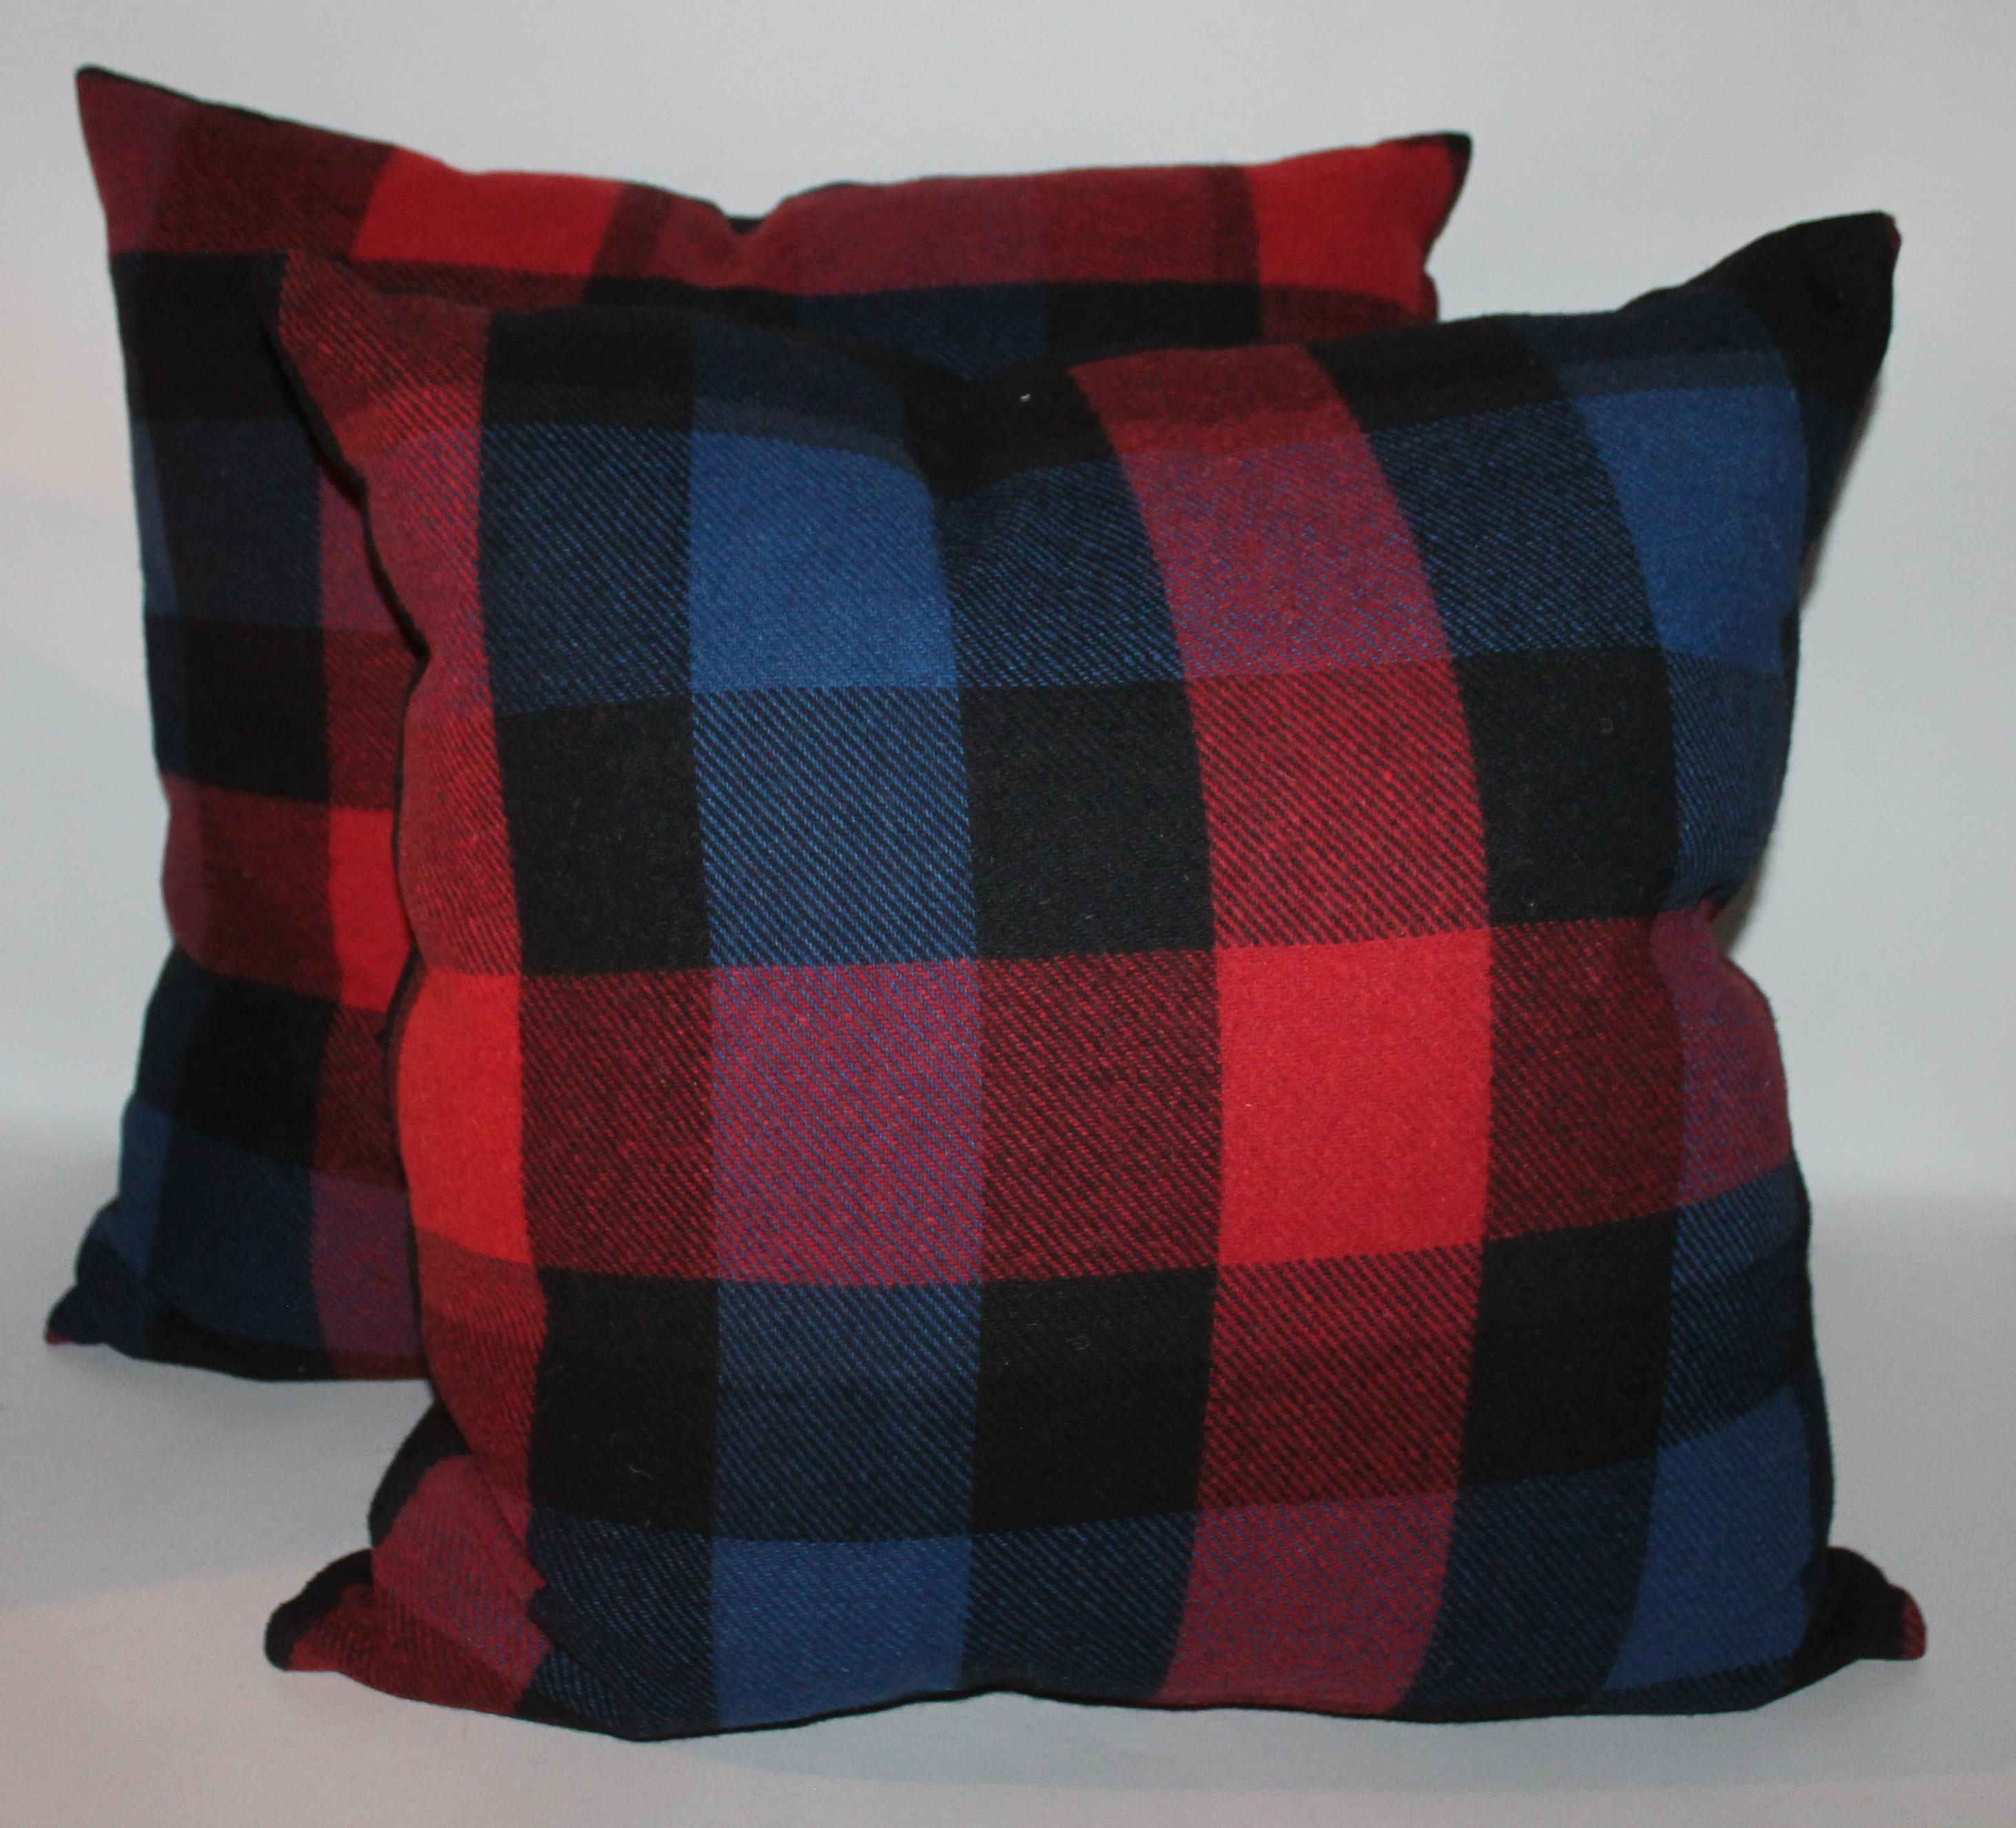 These vintage vibrant colors plaid blanket pillows are in fine condition and have cotton linen backing. Sold in pairs. Two pairs of each different color in stock.
Measures:
Small pair 20 x 20
Larger pair 22 x 22.